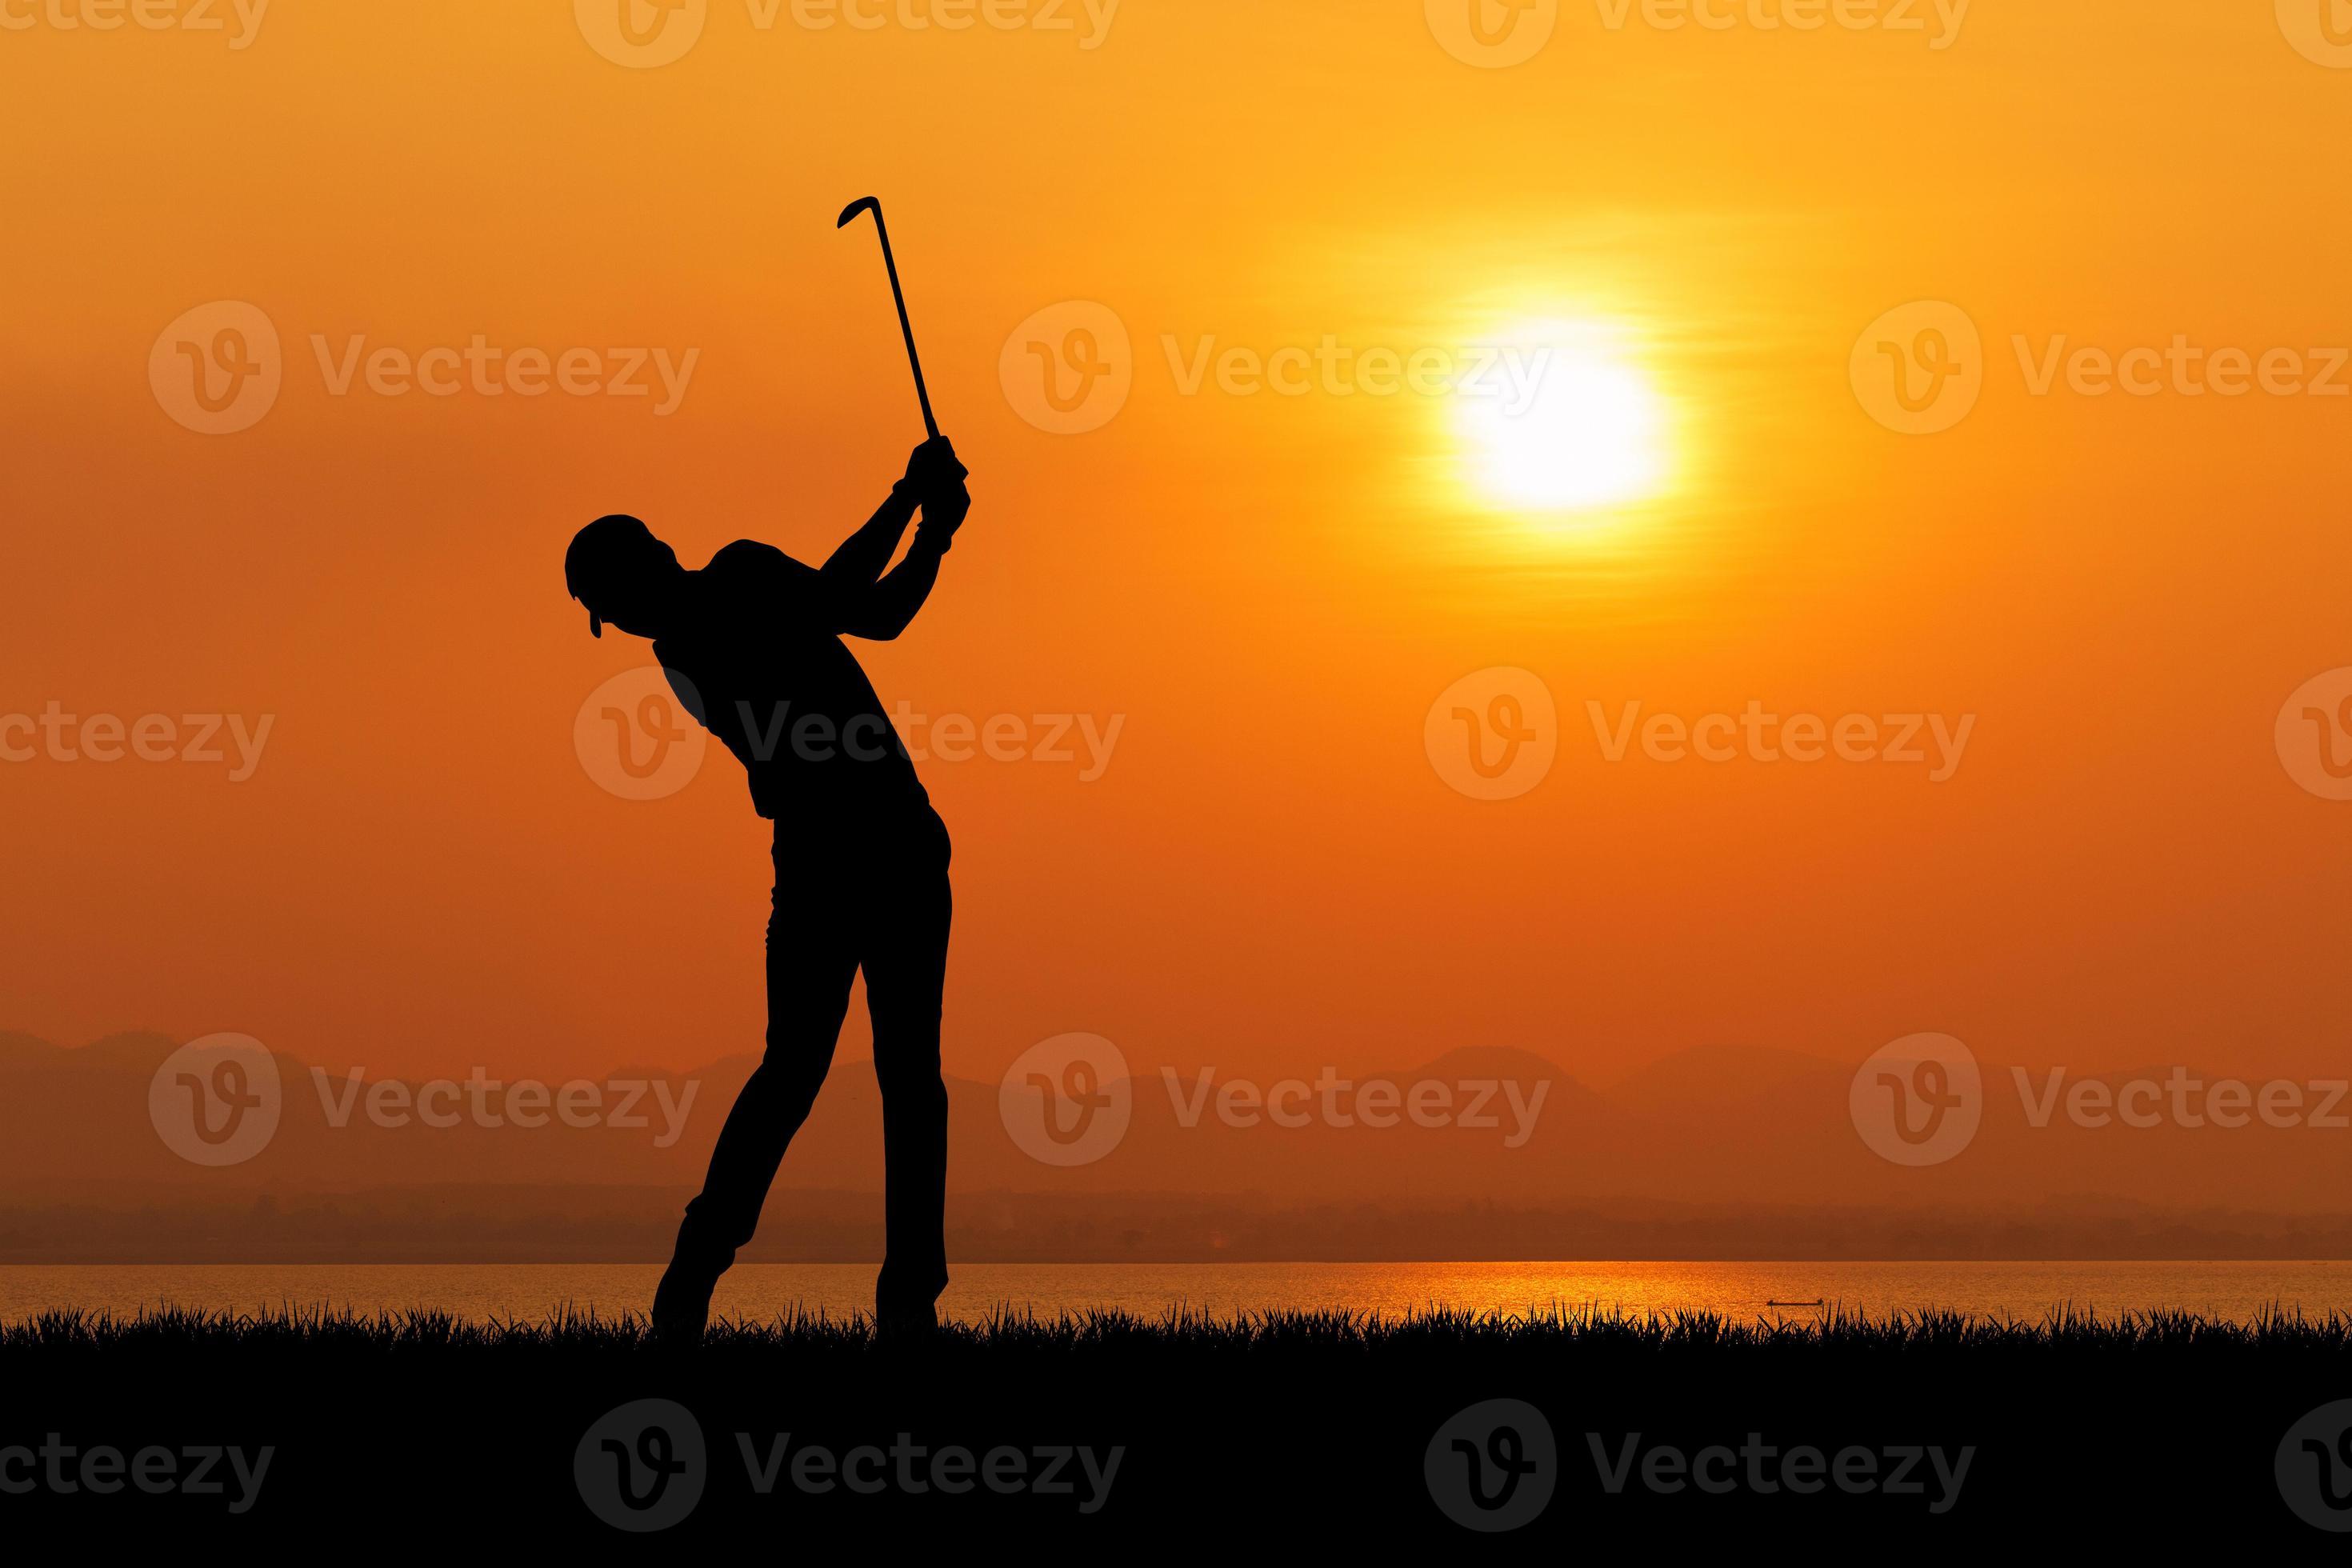 Silhouette of golfer against sunset photo